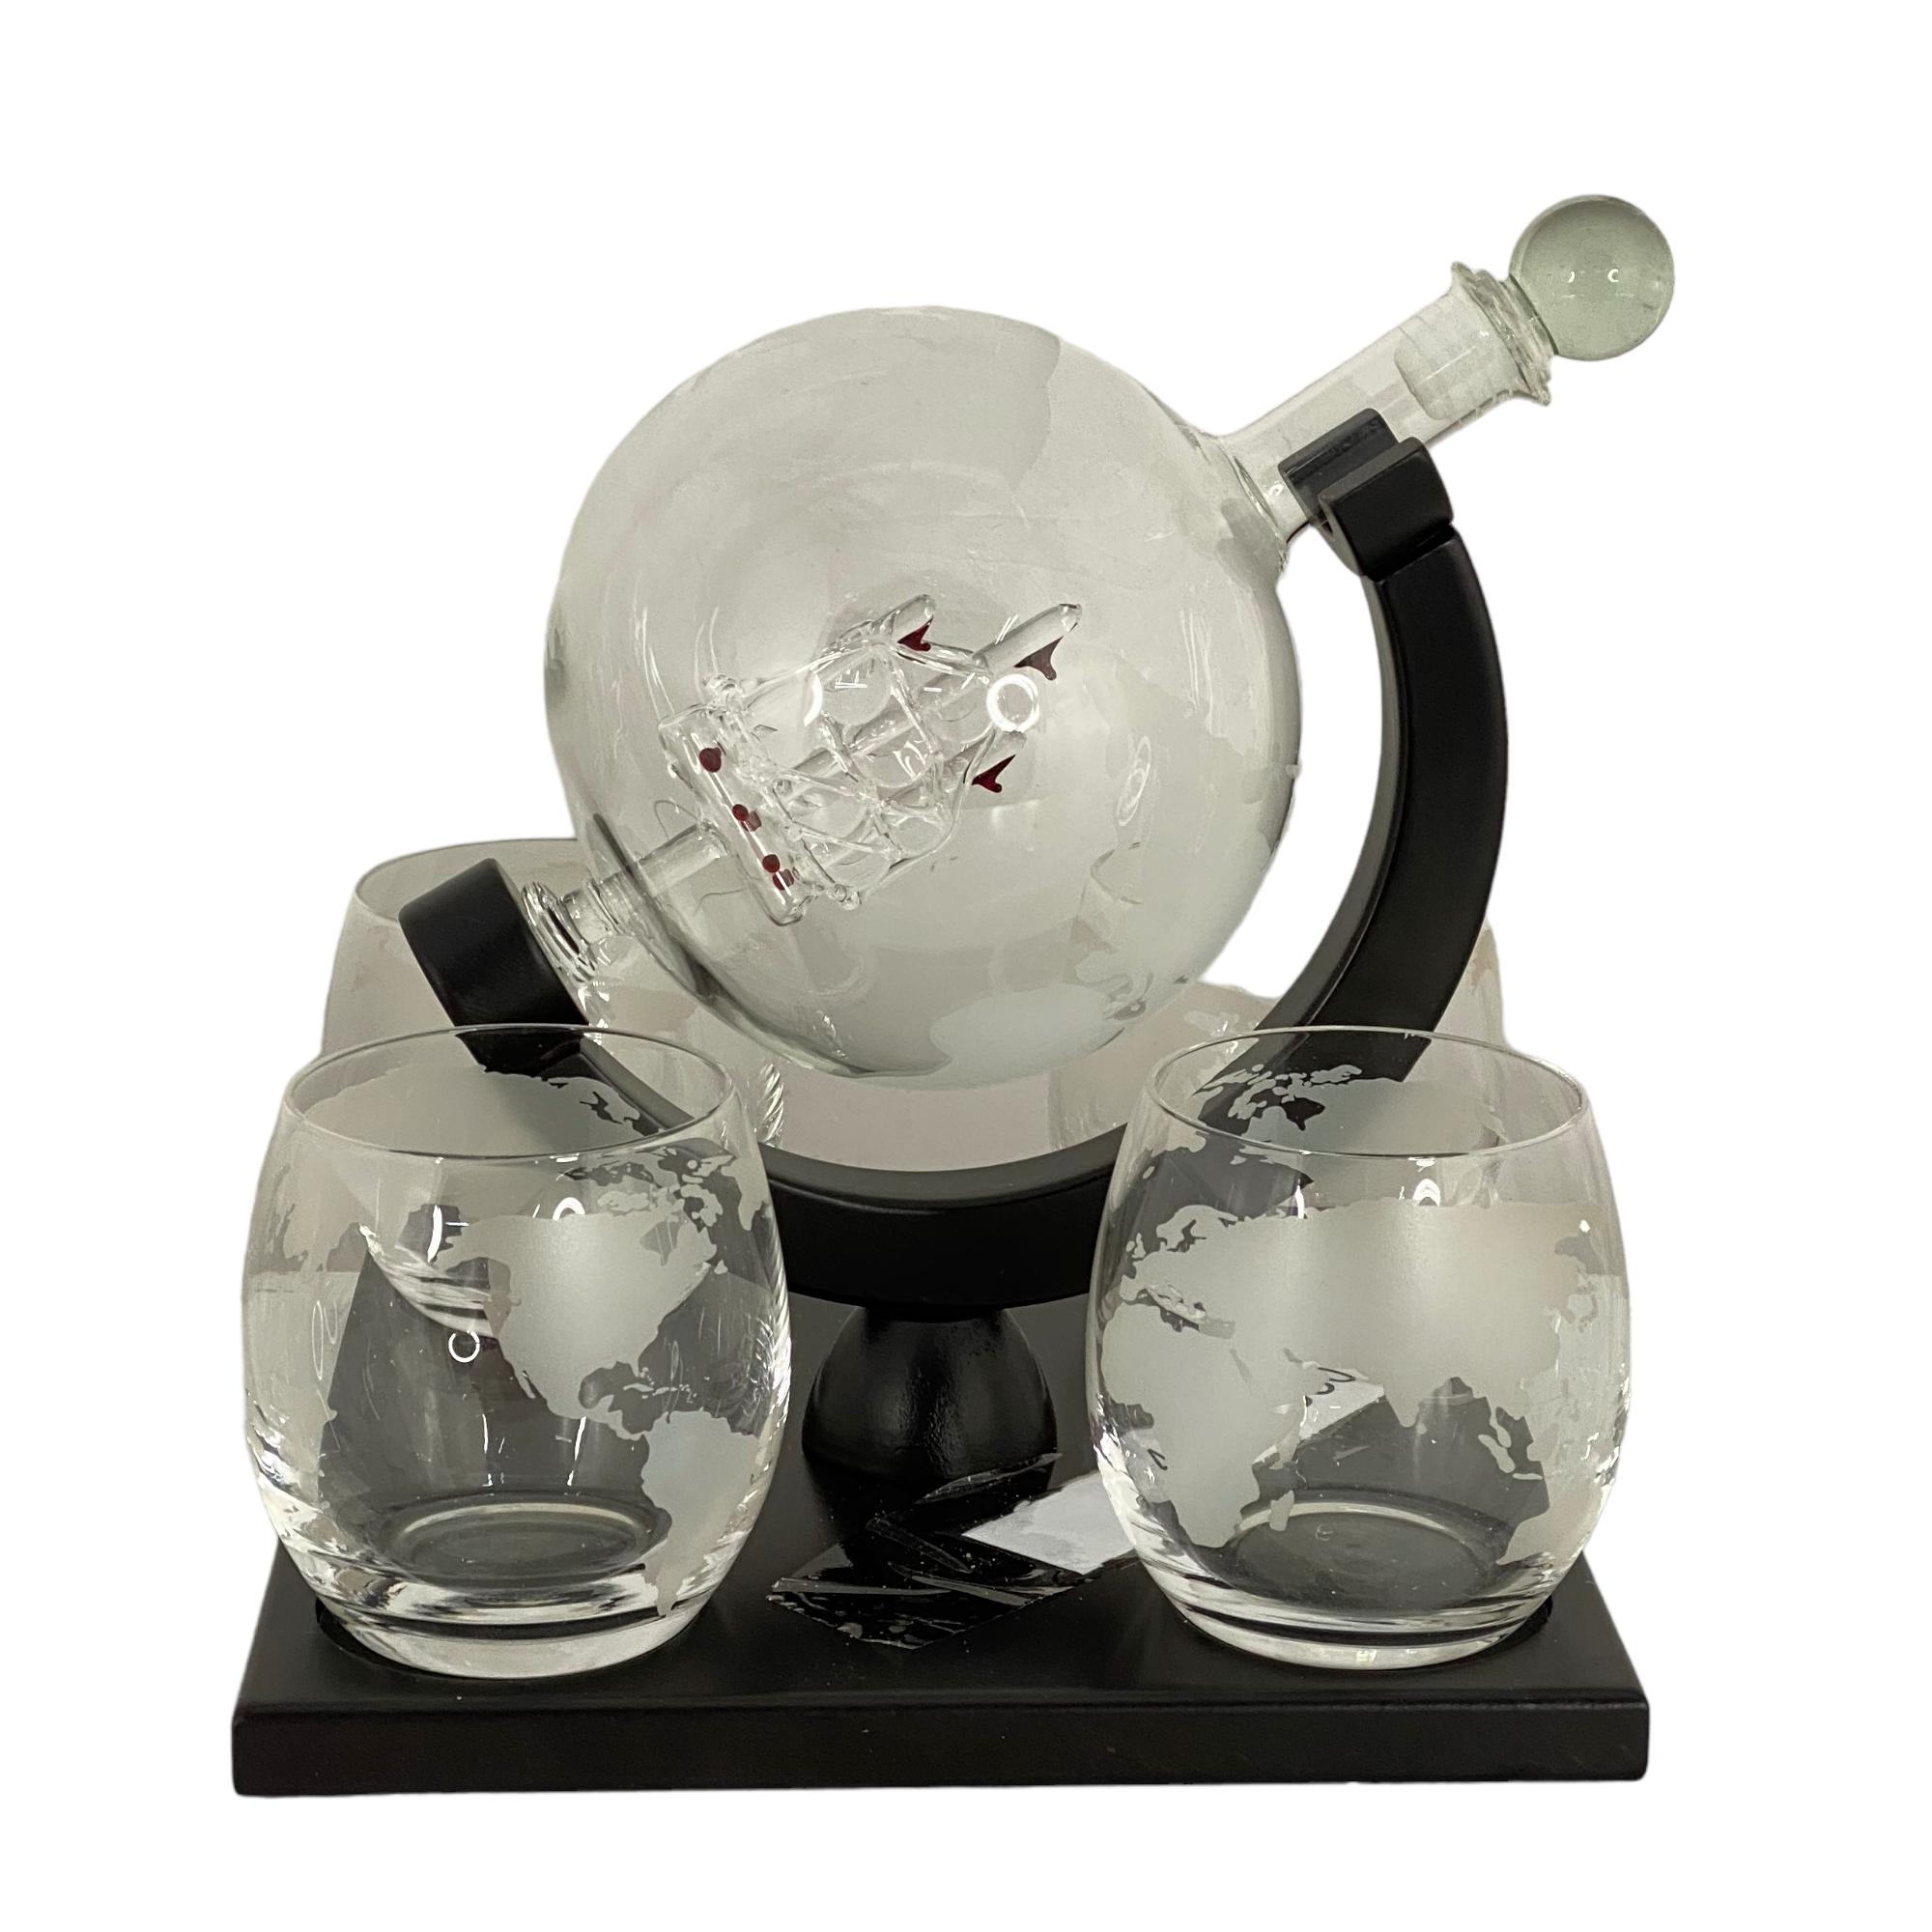 SET OF 5 GLOBE DECANTER WITH 4WINE GLASS - 413-270007